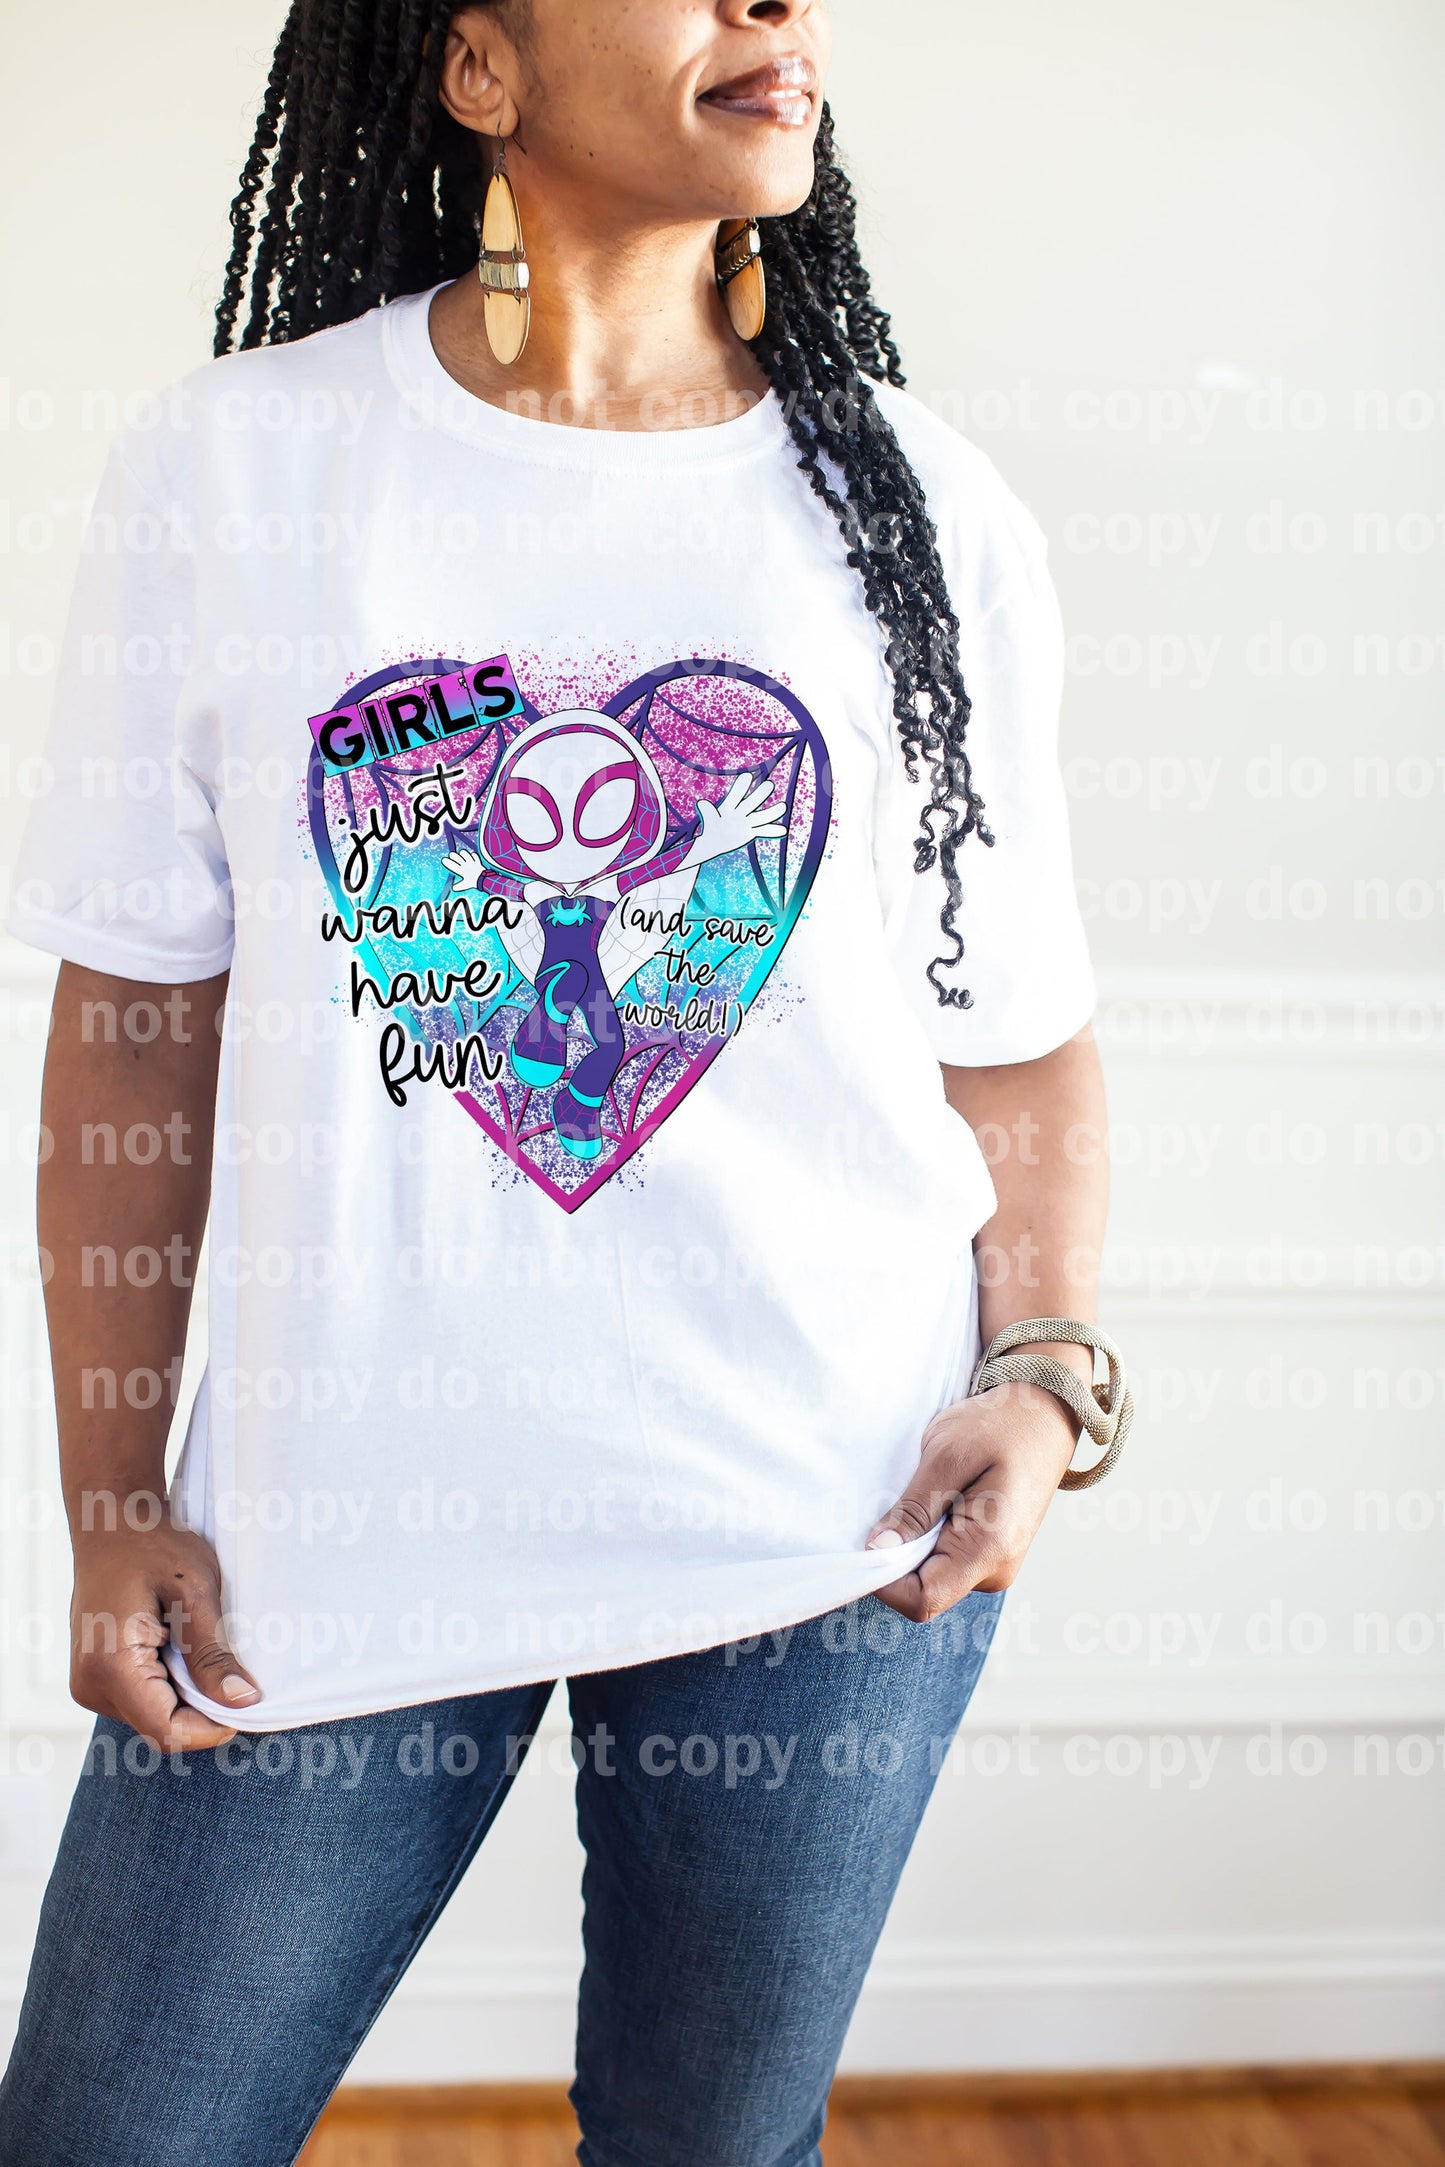 Girls Just Wanna Have Fun And Save The World Dream Print or Sublimation Print